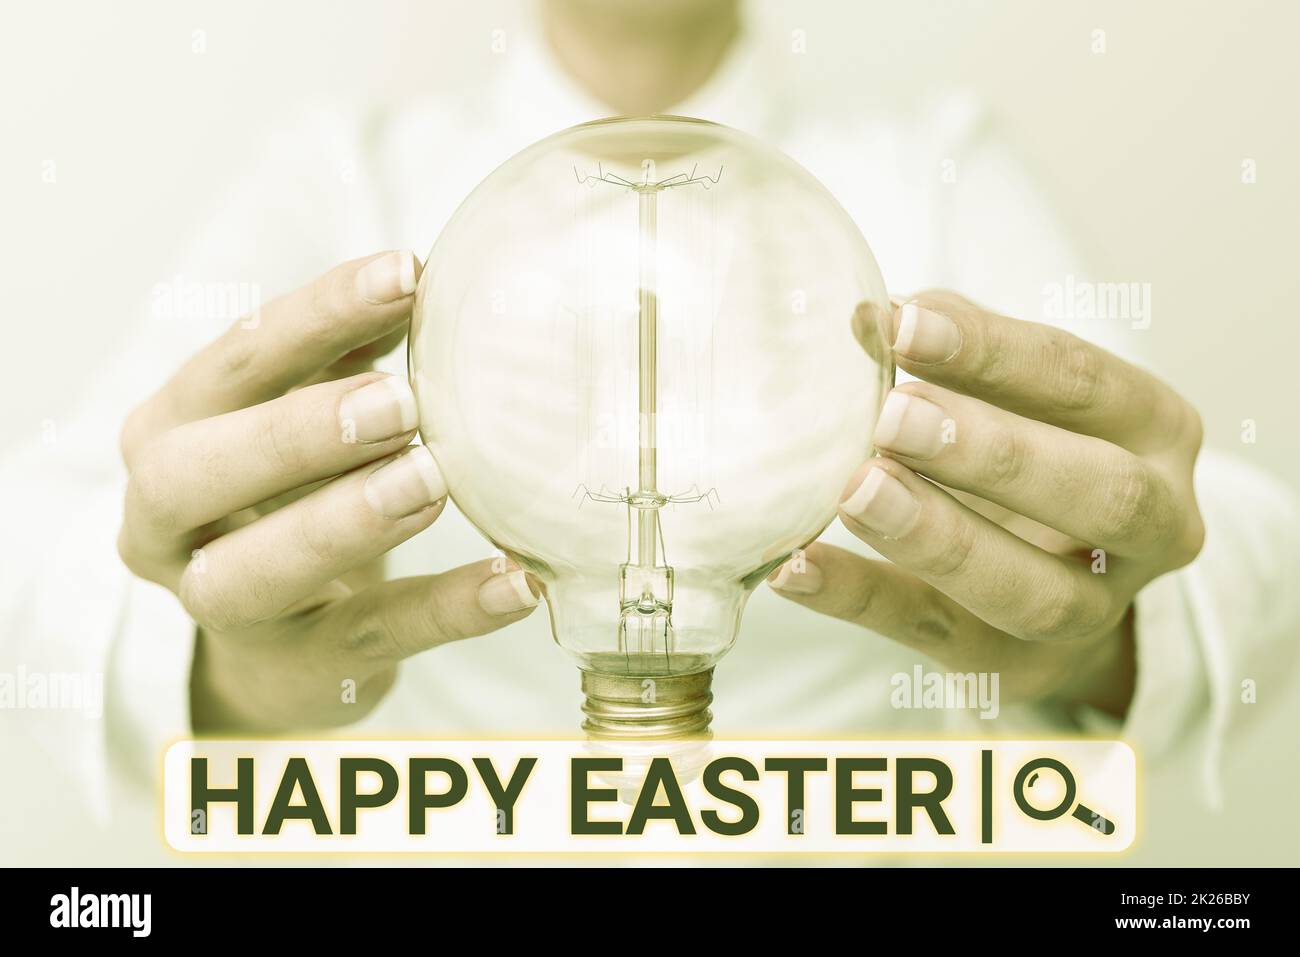 Sign displaying Happy Easter. Concept meaning Christian feast commemorating the resurrection of Jesus Lady in outfit holding lamp with two hands presenting new technology ideas Stock Photo